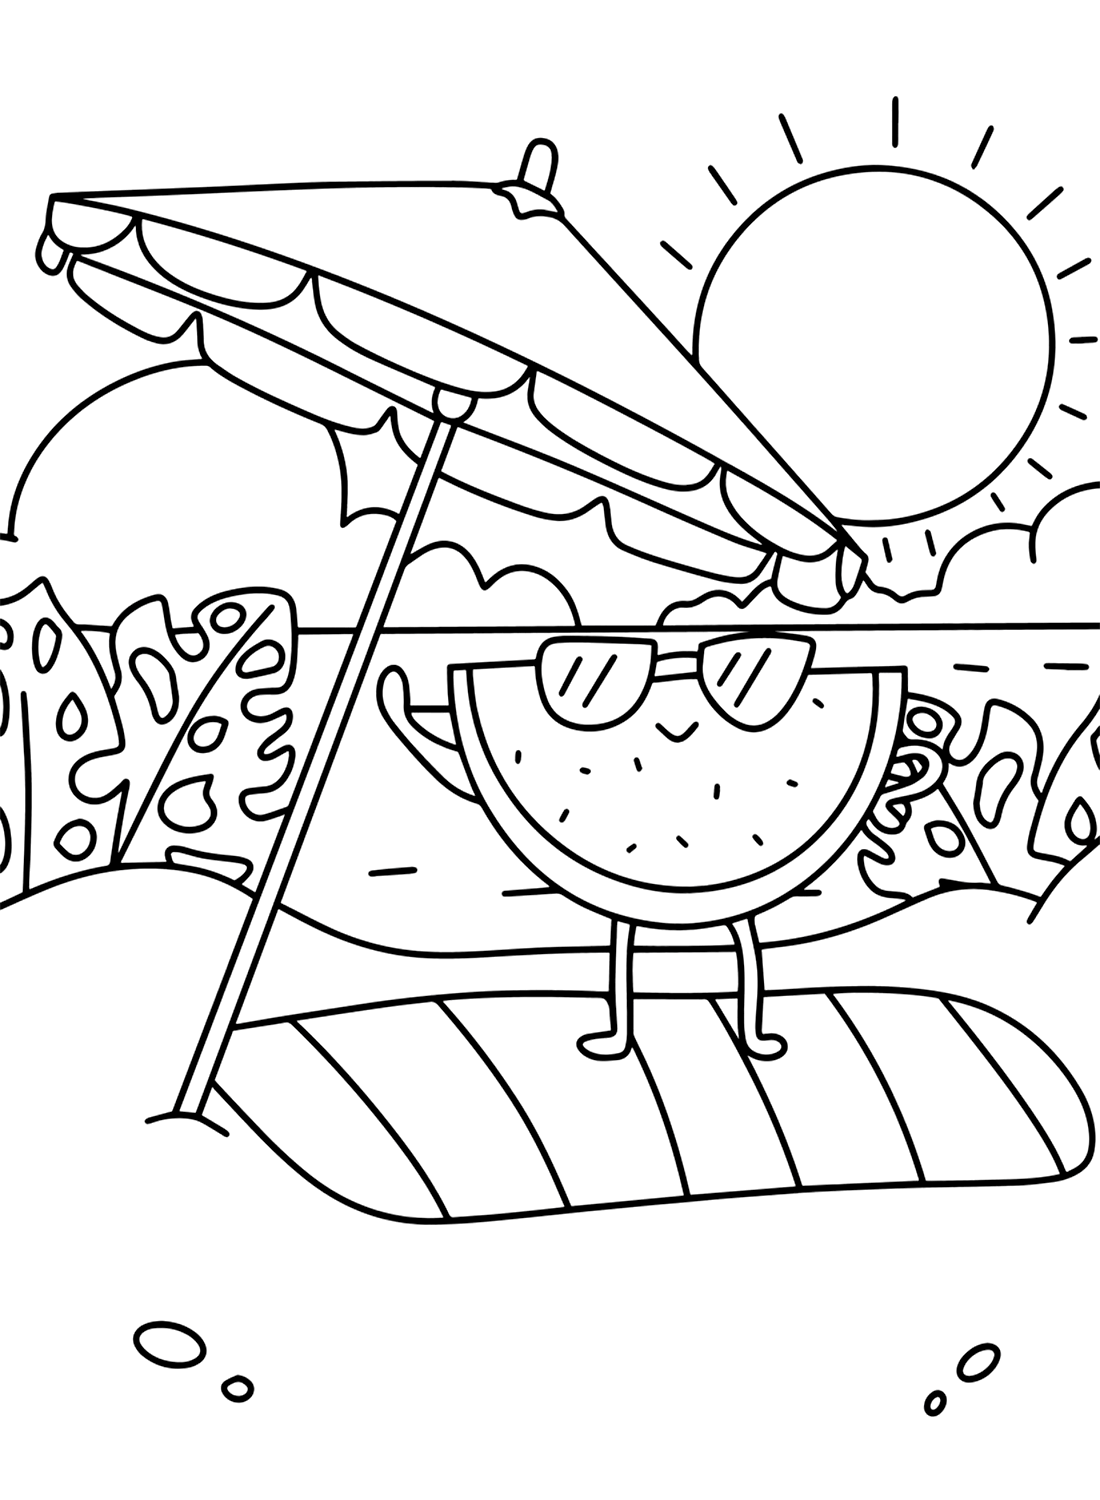 Relax with Watermelon Coloring Pages